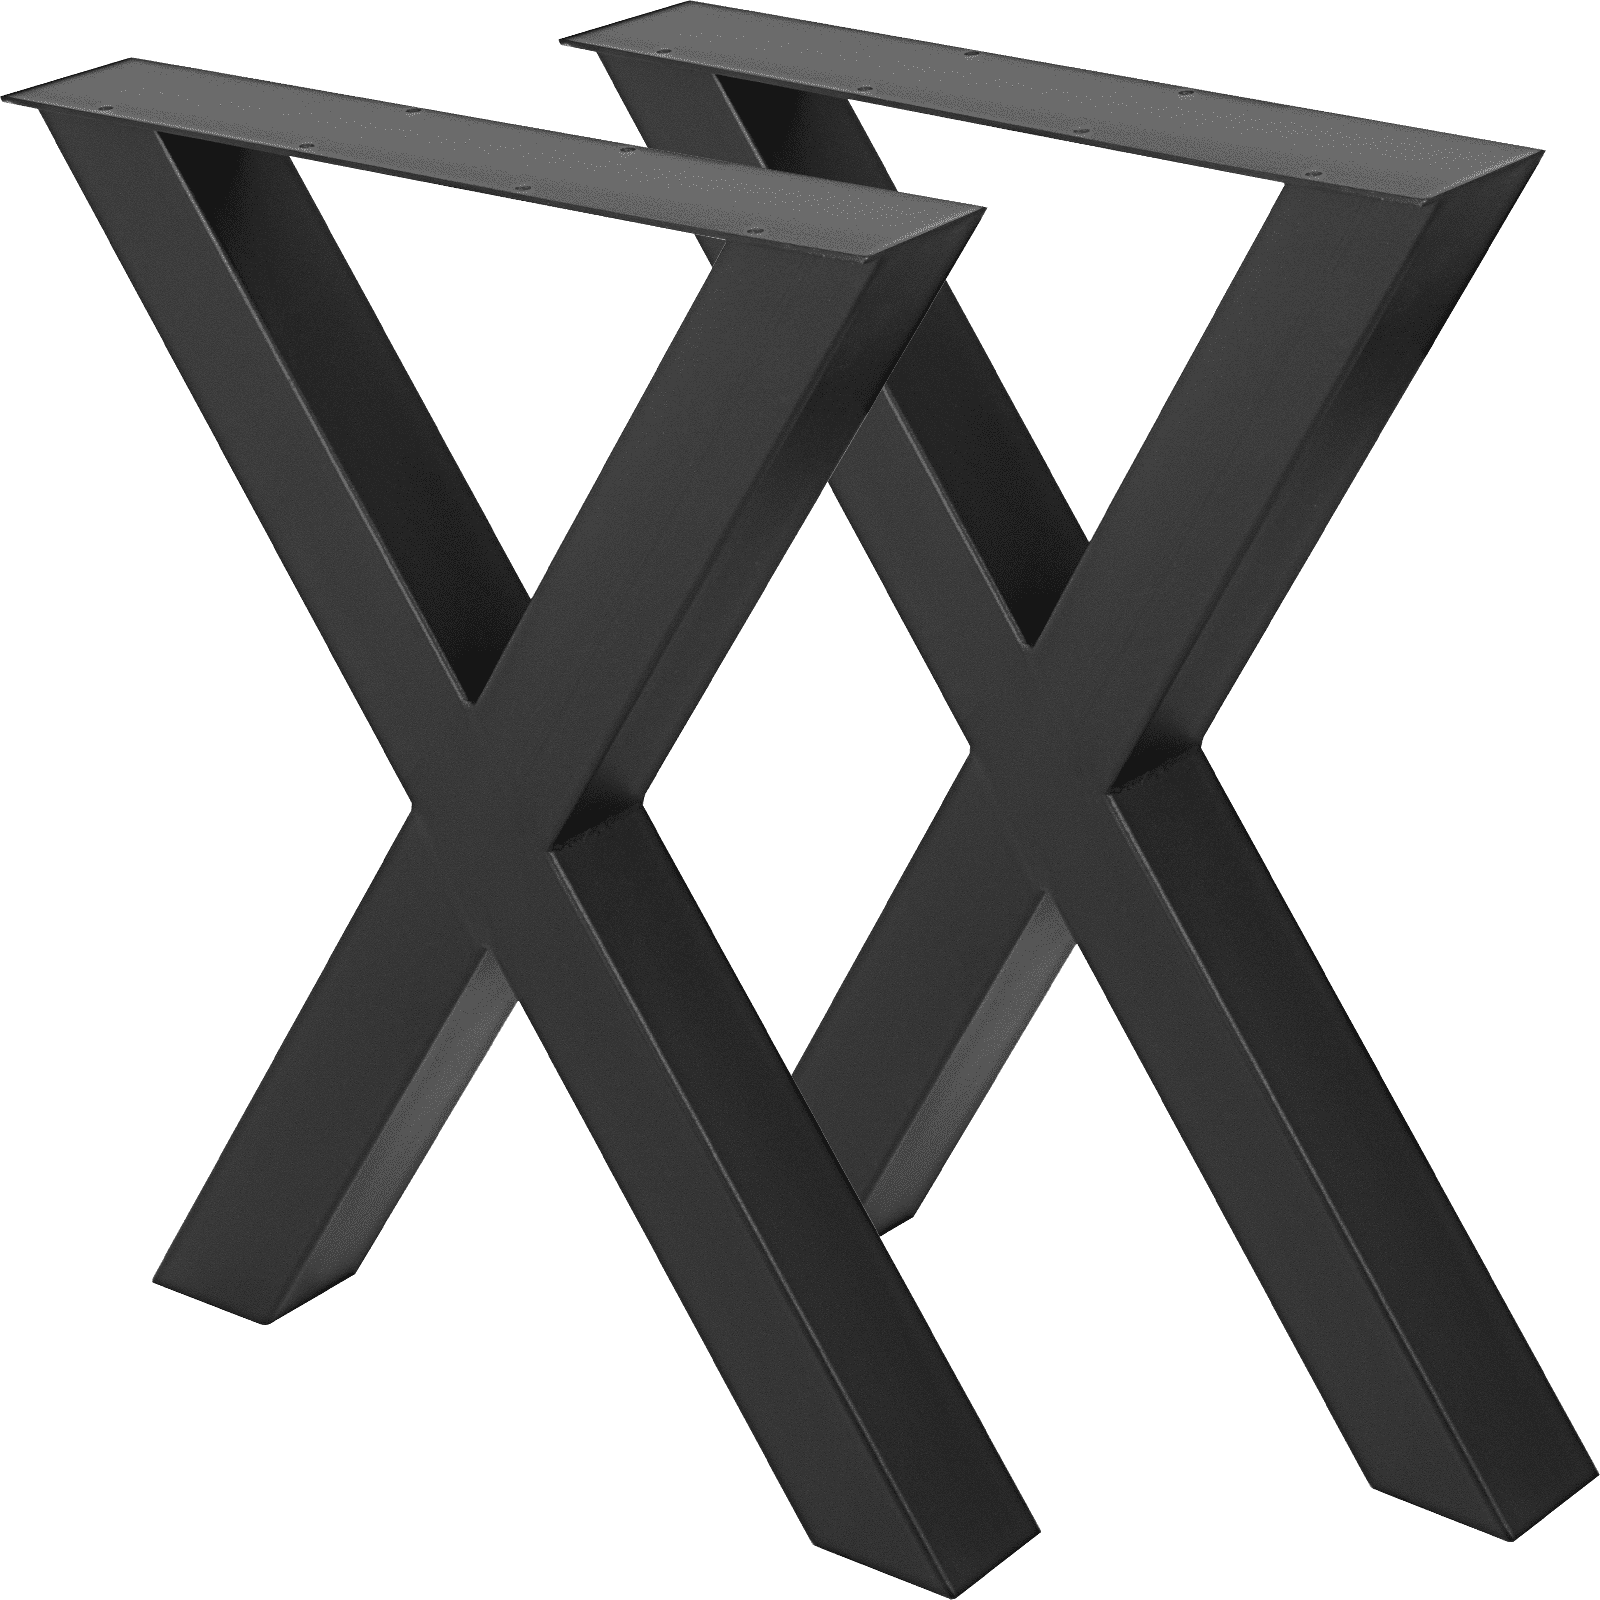 2pc/set H style black metal table legs w/ cover for home/office desk legs only 